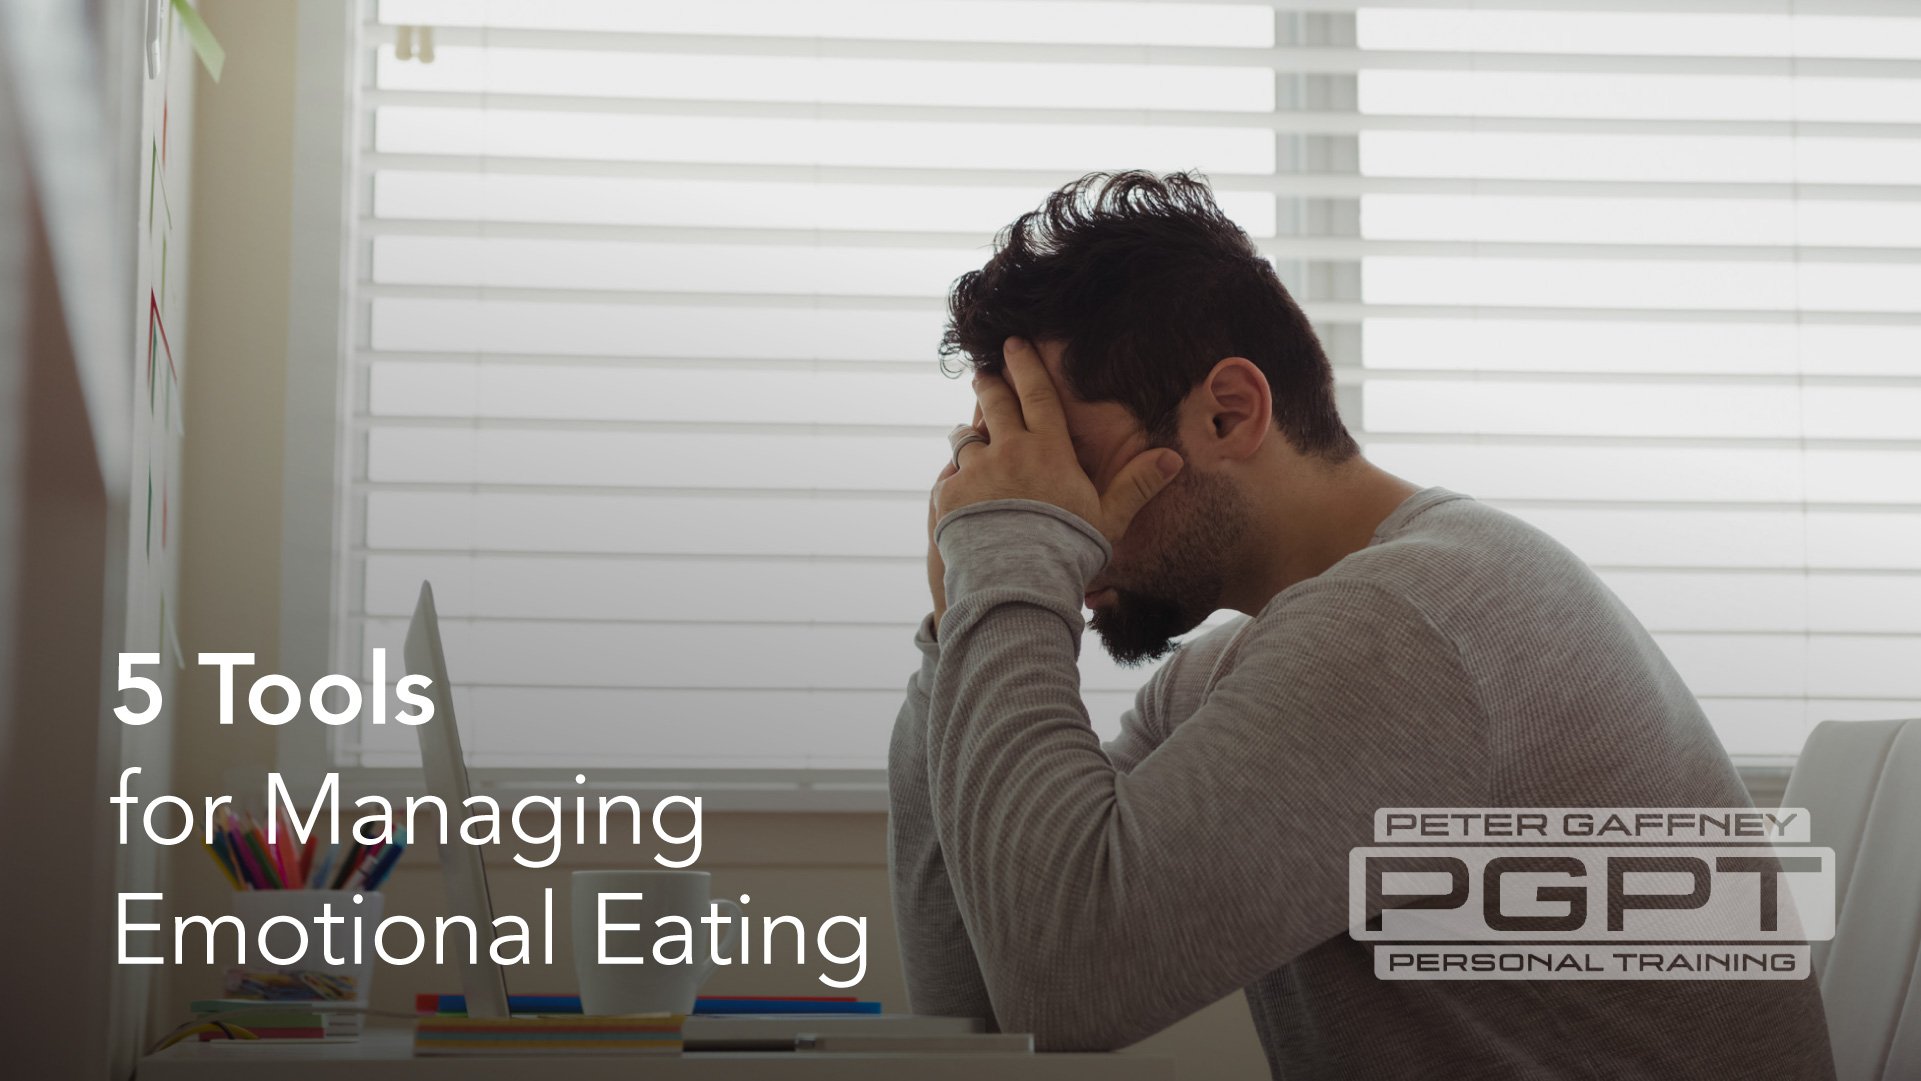 How to Stop Stress Eating: 5 Tools for Managing Emotional Eating